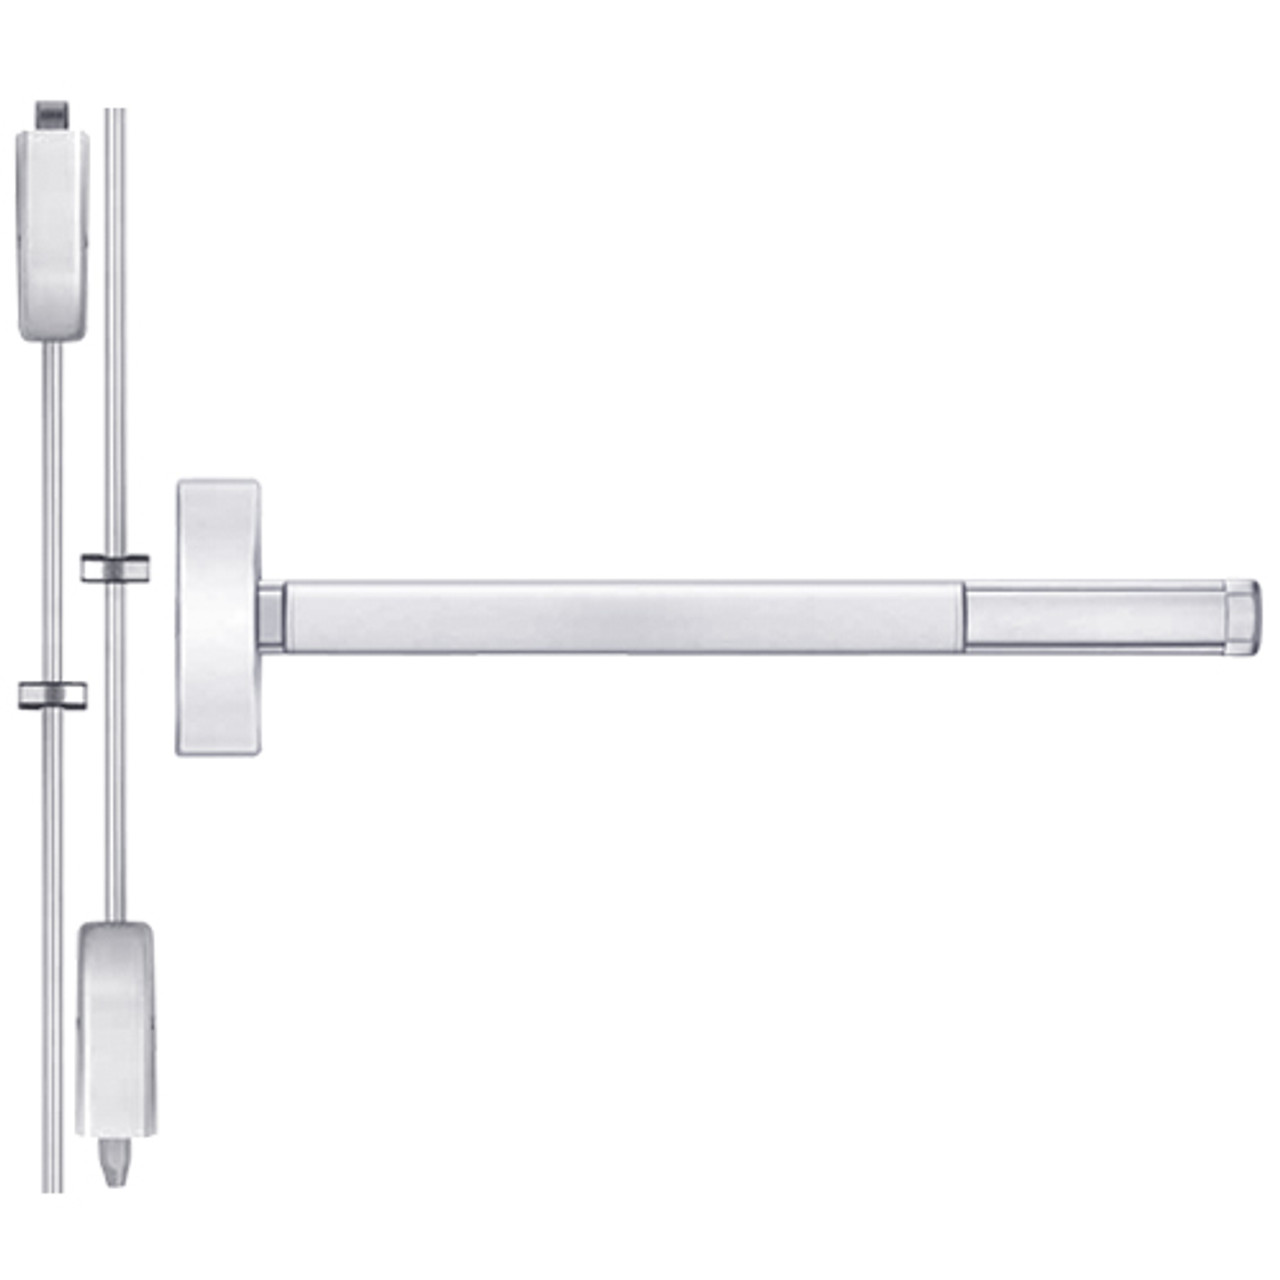 TS2214LBR-625-48 PHI 2200 Series Non Fire Rated Apex Surface Vertical Rod Device with Touchbar Monitoring Switch Prepped for Lever-Knob Always Active in Bright Chrome Finish